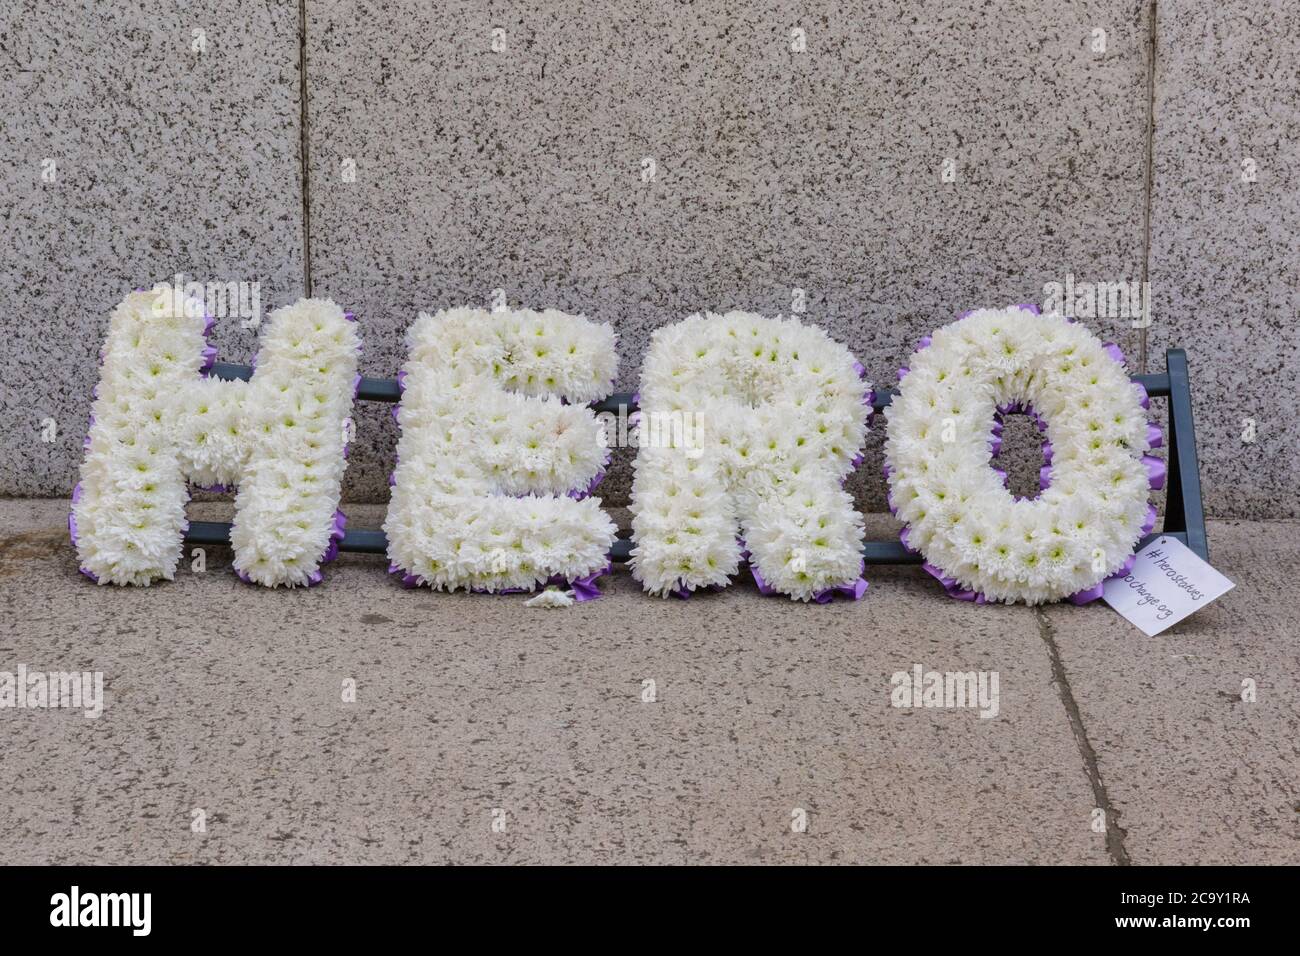 Hero flower display by the 'Save our Statues' campaign on a statue in London, England Stock Photo